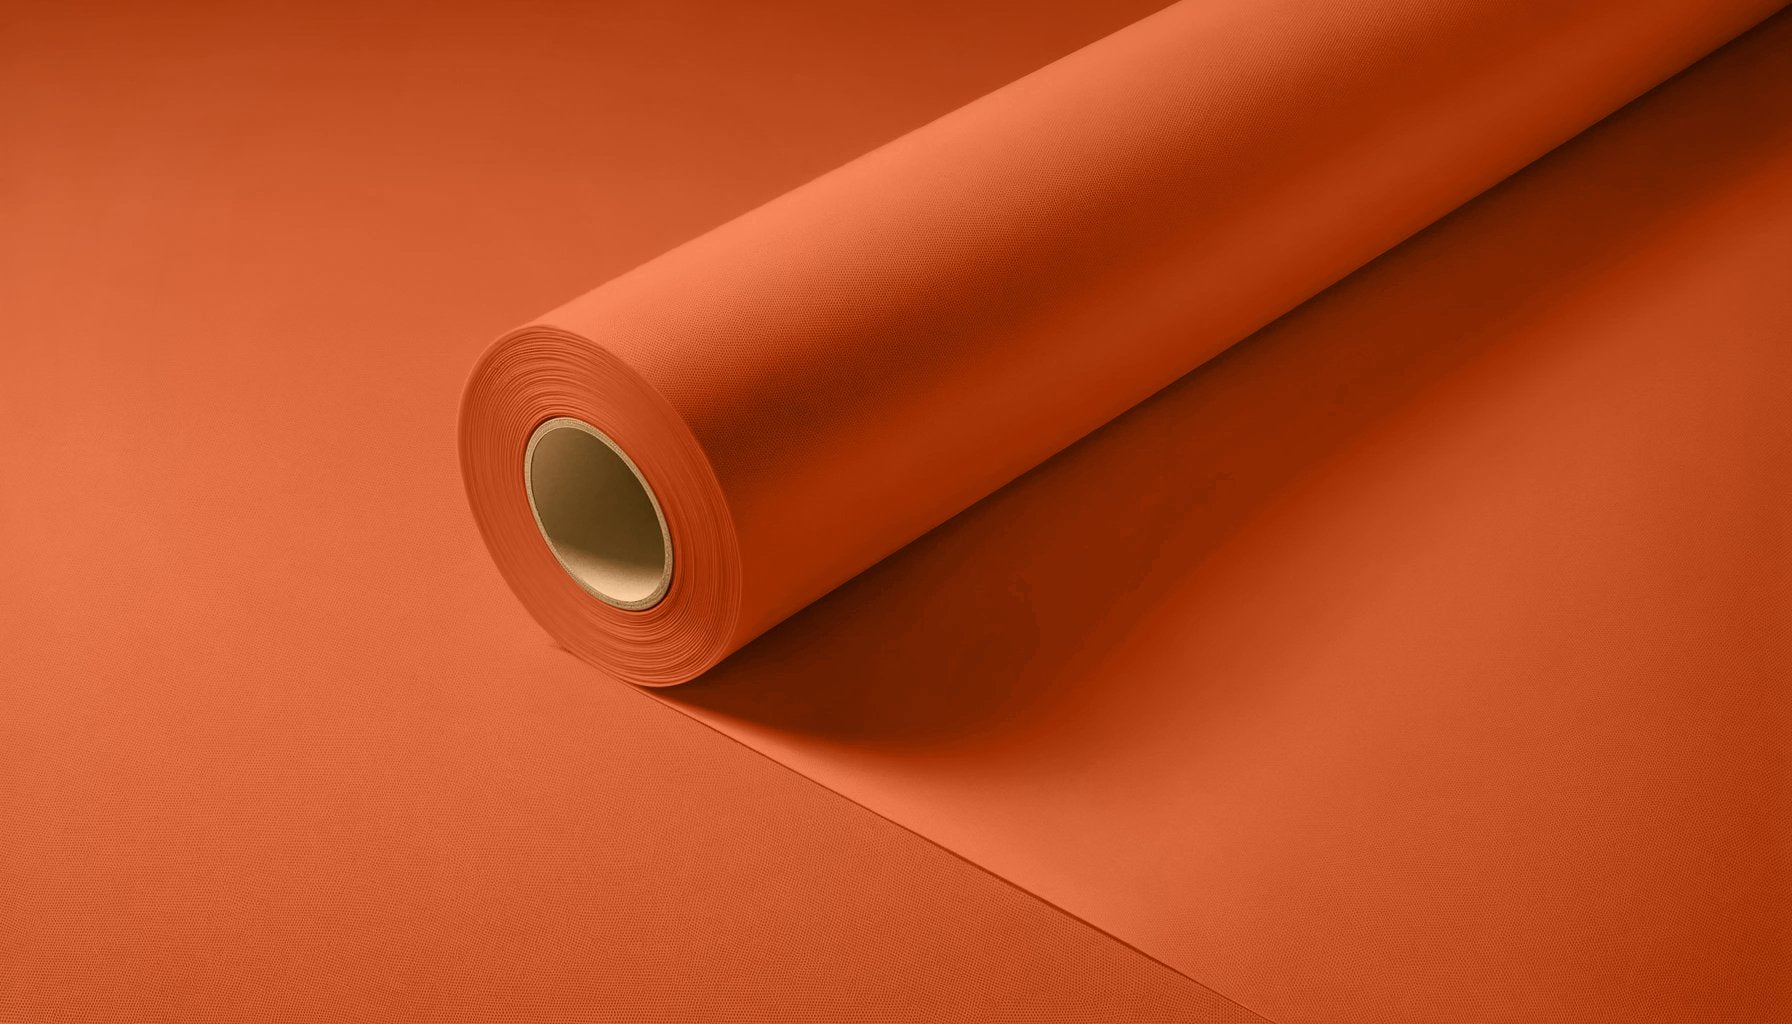 Peel & Stick Removable Re-usable Paint - Color RAL 2001 Red Orange - offRAL™ - RALRAW LLC, USA